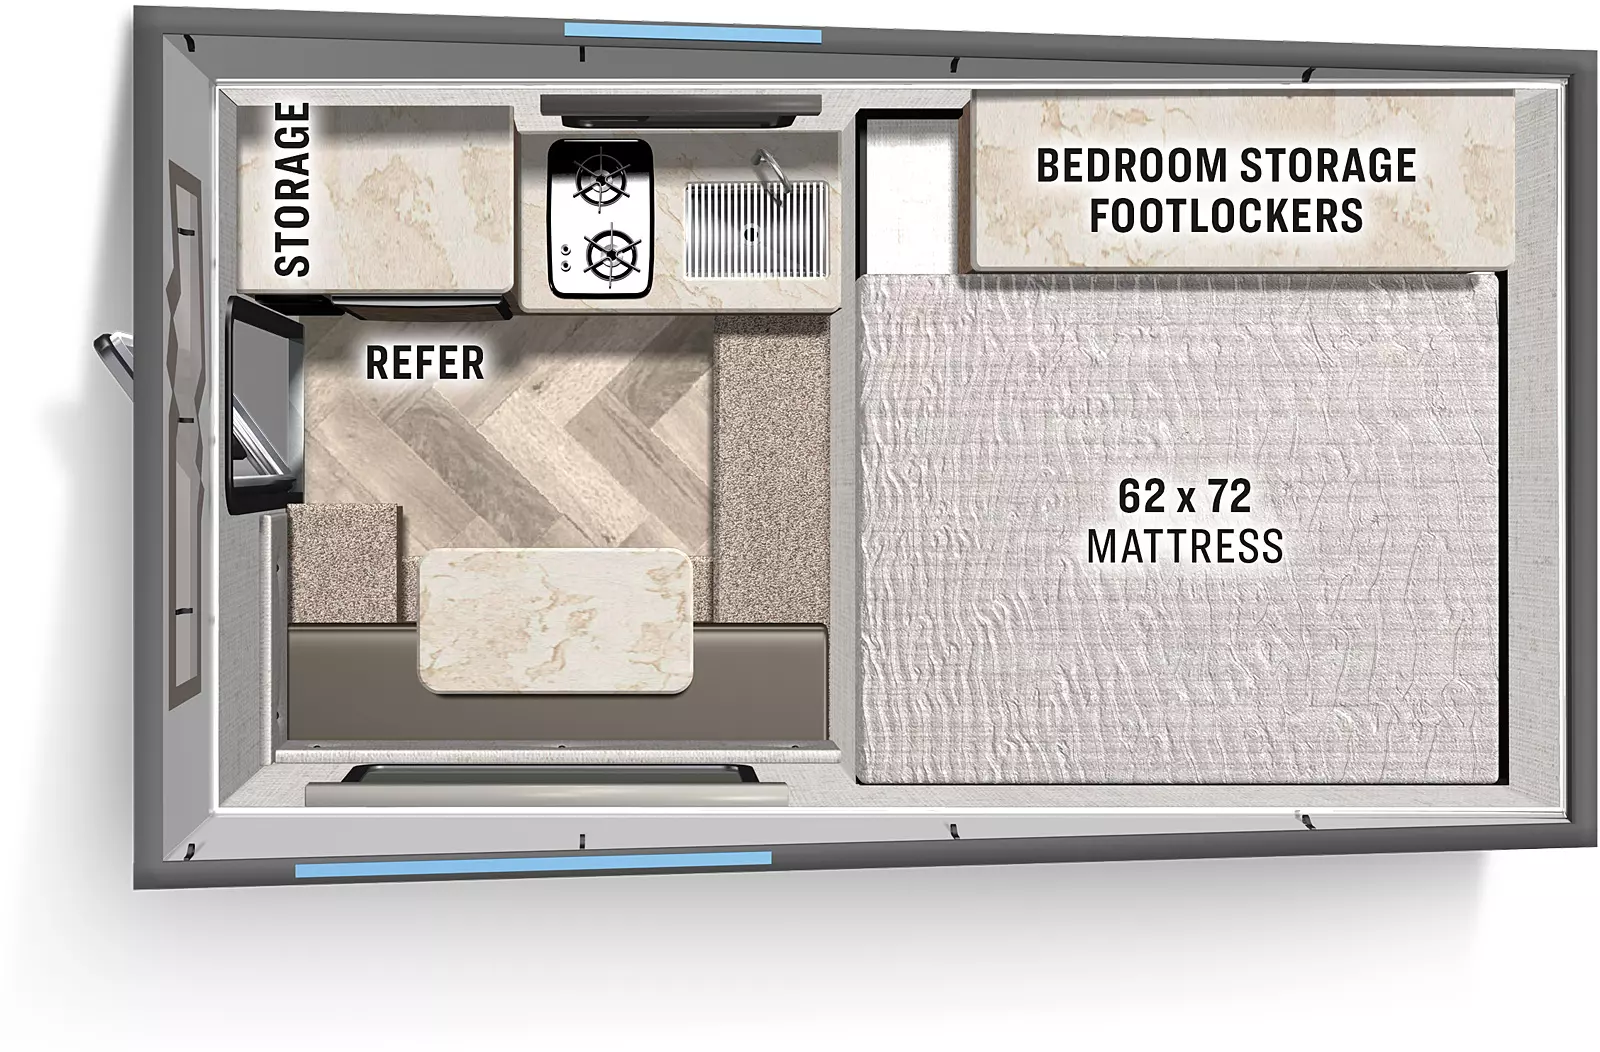 The EA-1 has no slide outs. Interior layout from front to back includes a 62x72 Mattress and bedroom storage footlocker; step down from front; camp side with seating with table; off-camp side sink, cooktop, refrigerator and storage. Rear entry door.